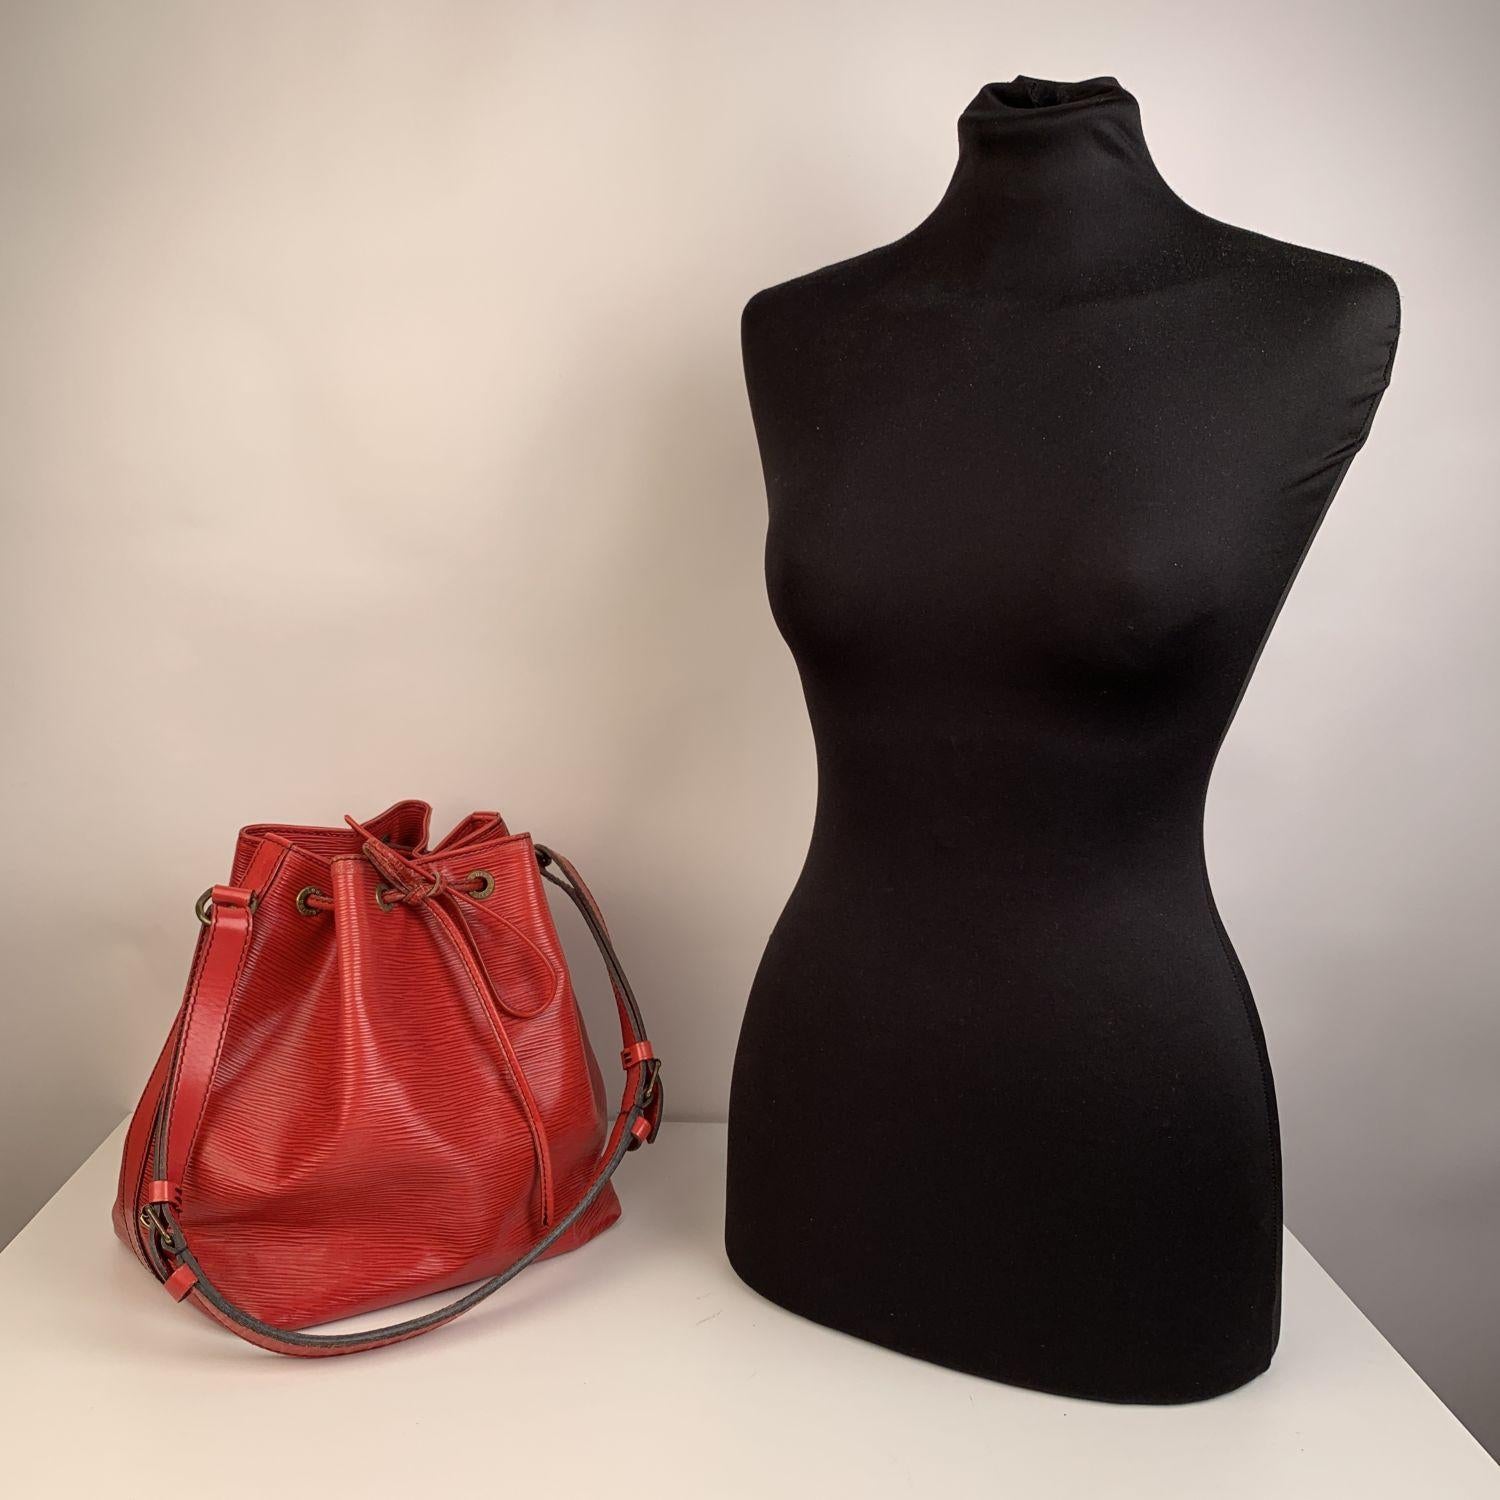 Iconic ' Petit Noé' bucket bag by LOUIS VUITTON was first created in 1932 to carry champagne bottles. Red Epi leather with drawstring closure and microfibrer lining. 1side zip pocket. Adjustable shoulder strap

Logos / Tags: LV - LOUIS VUITTON logo